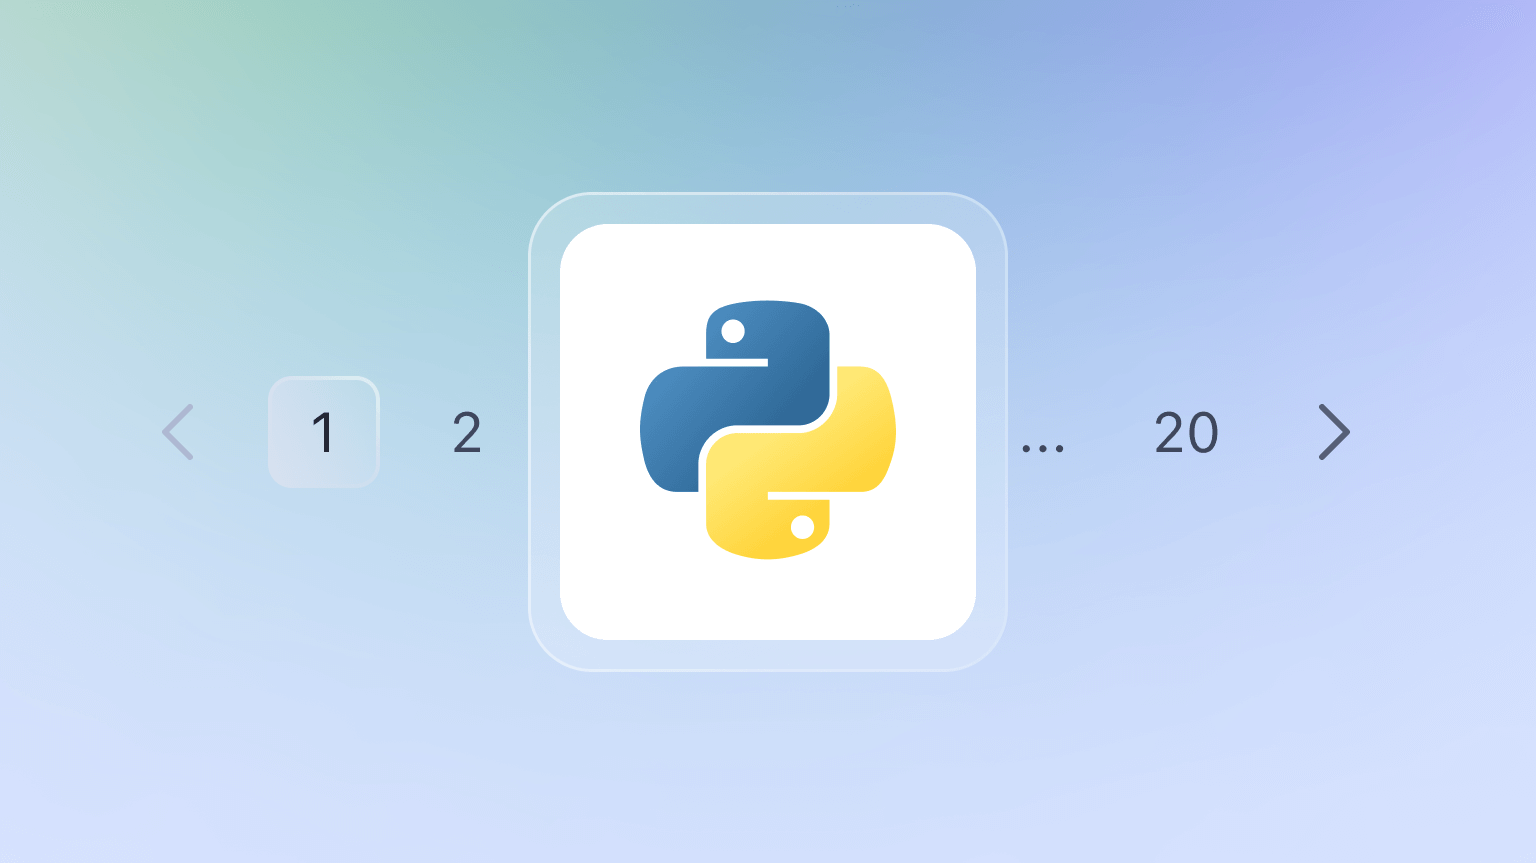 Pagination in Python: scraping paginated websites